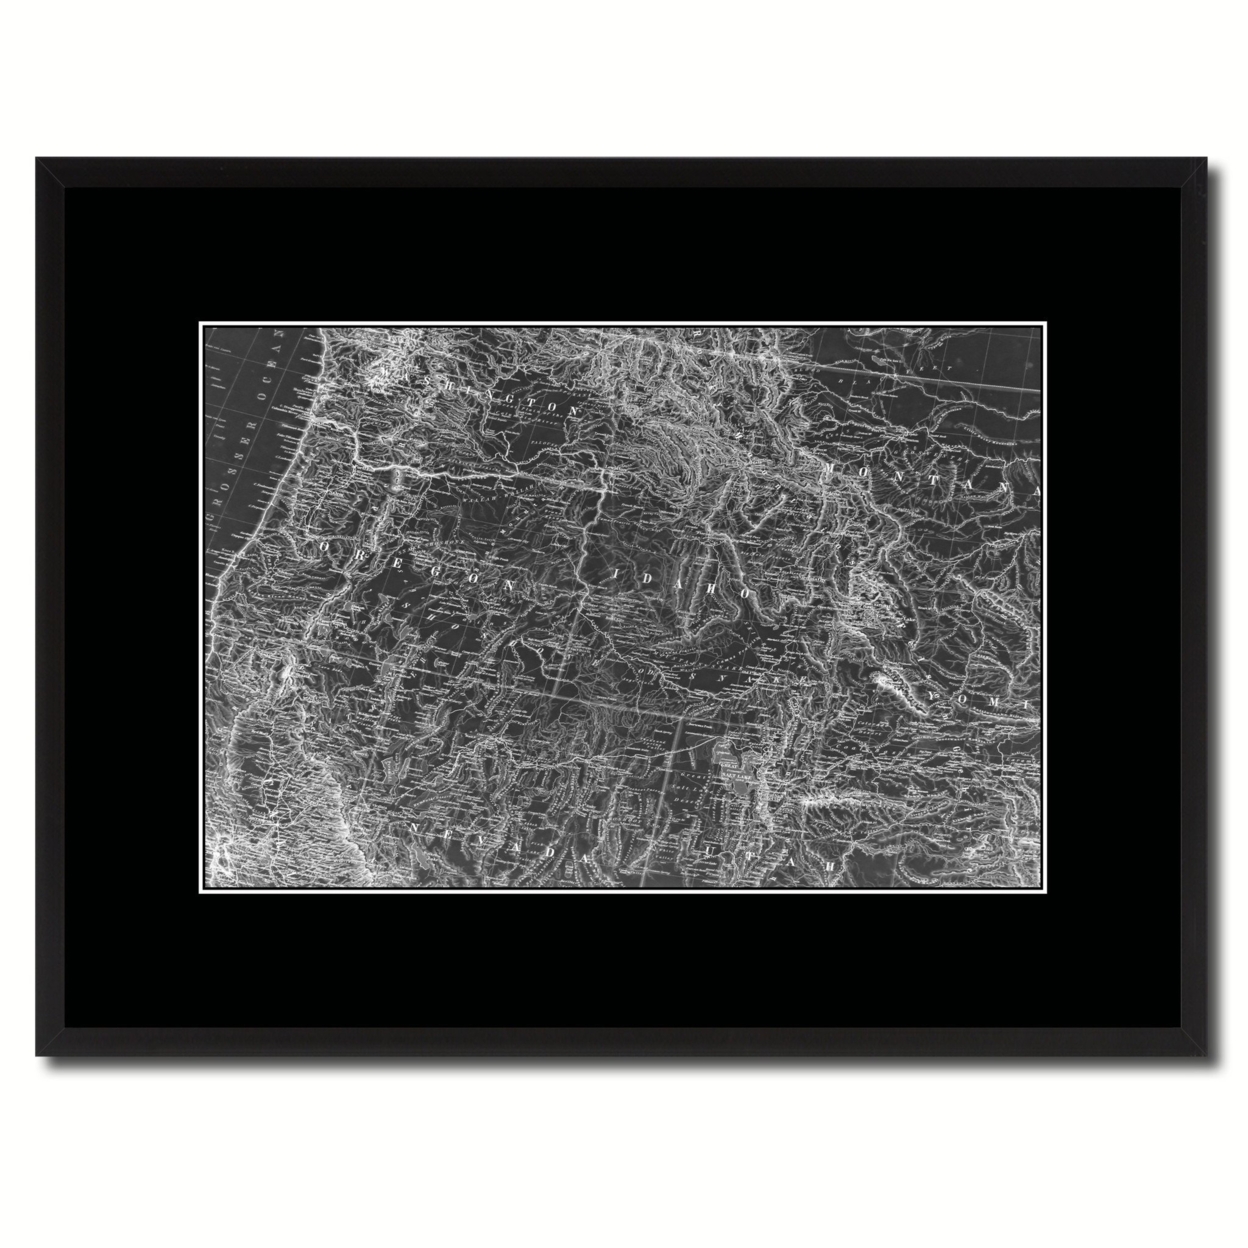 US Pacific Northwest Vintage Monochrome Map Canvas Print, Gifts Picture Frames Home Decor Wall Art - 28" x 37"